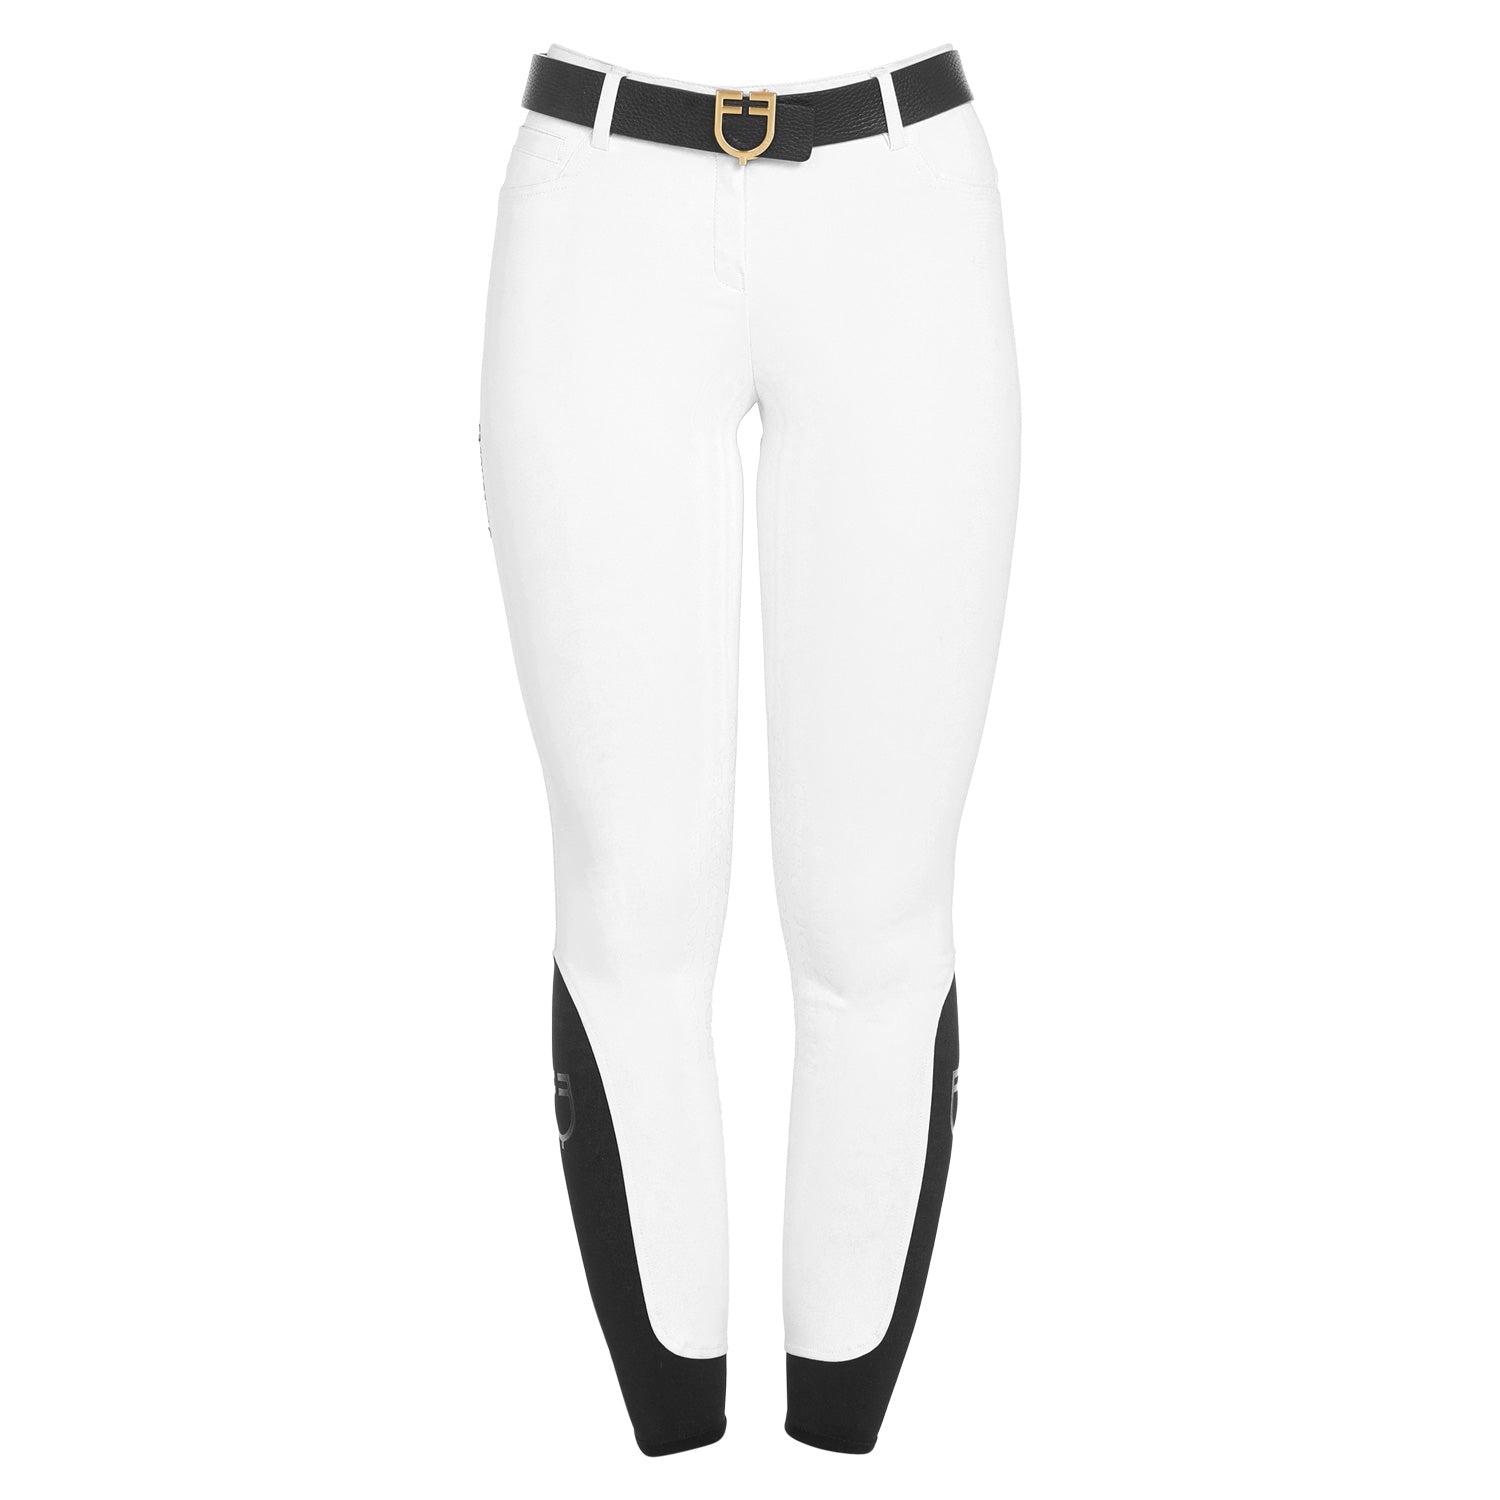 White show breeches with knee grip